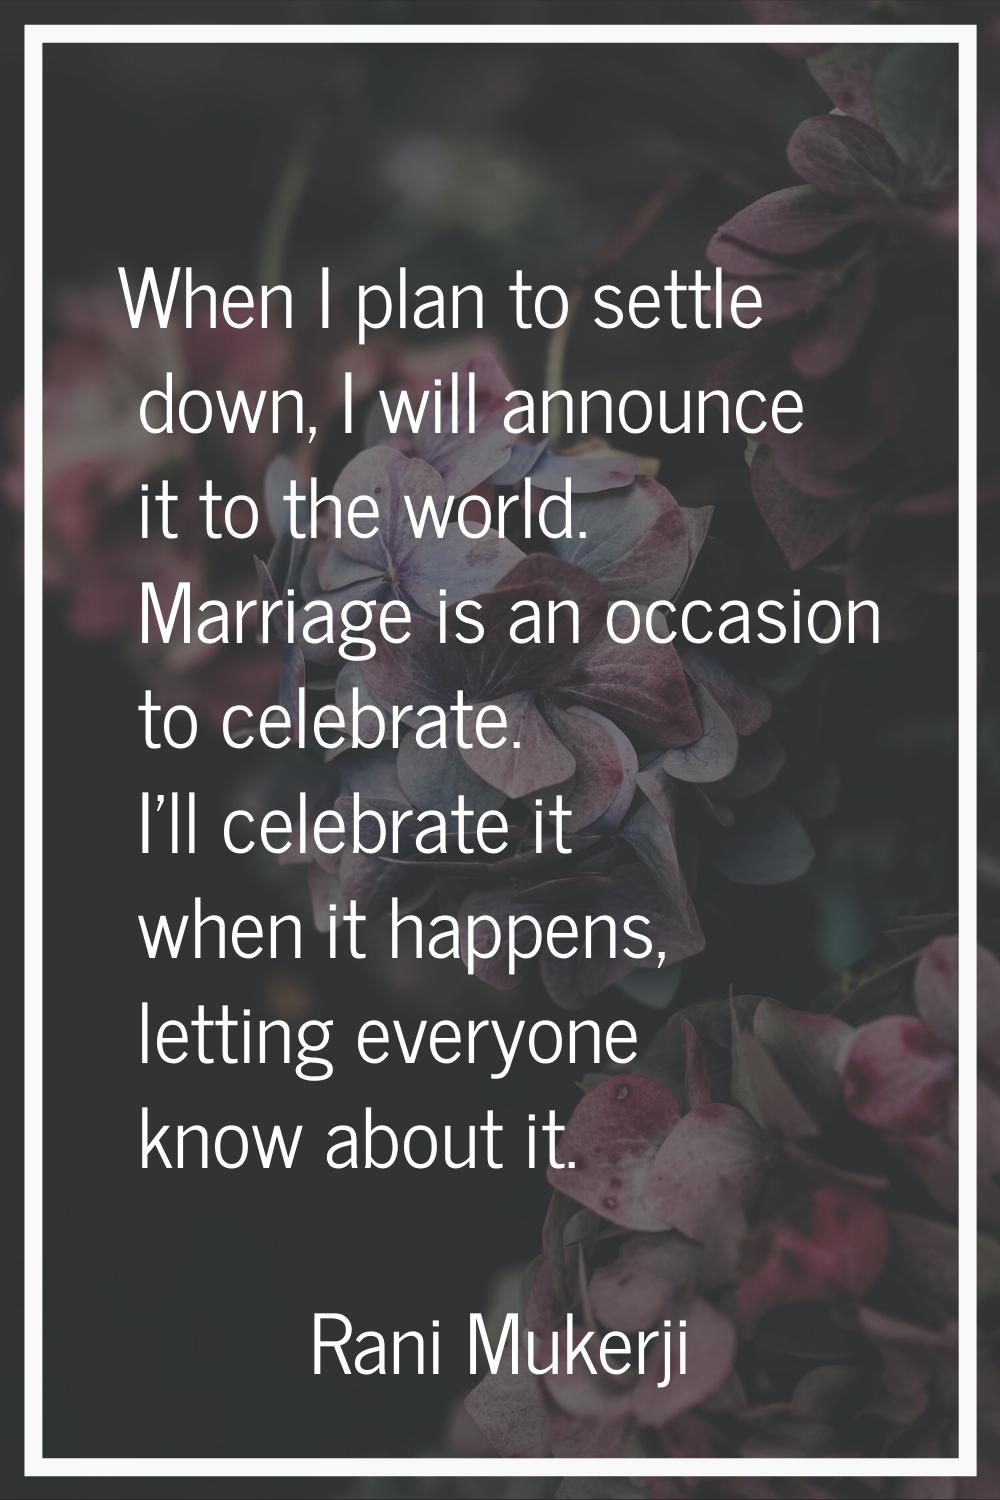 When I plan to settle down, I will announce it to the world. Marriage is an occasion to celebrate. 